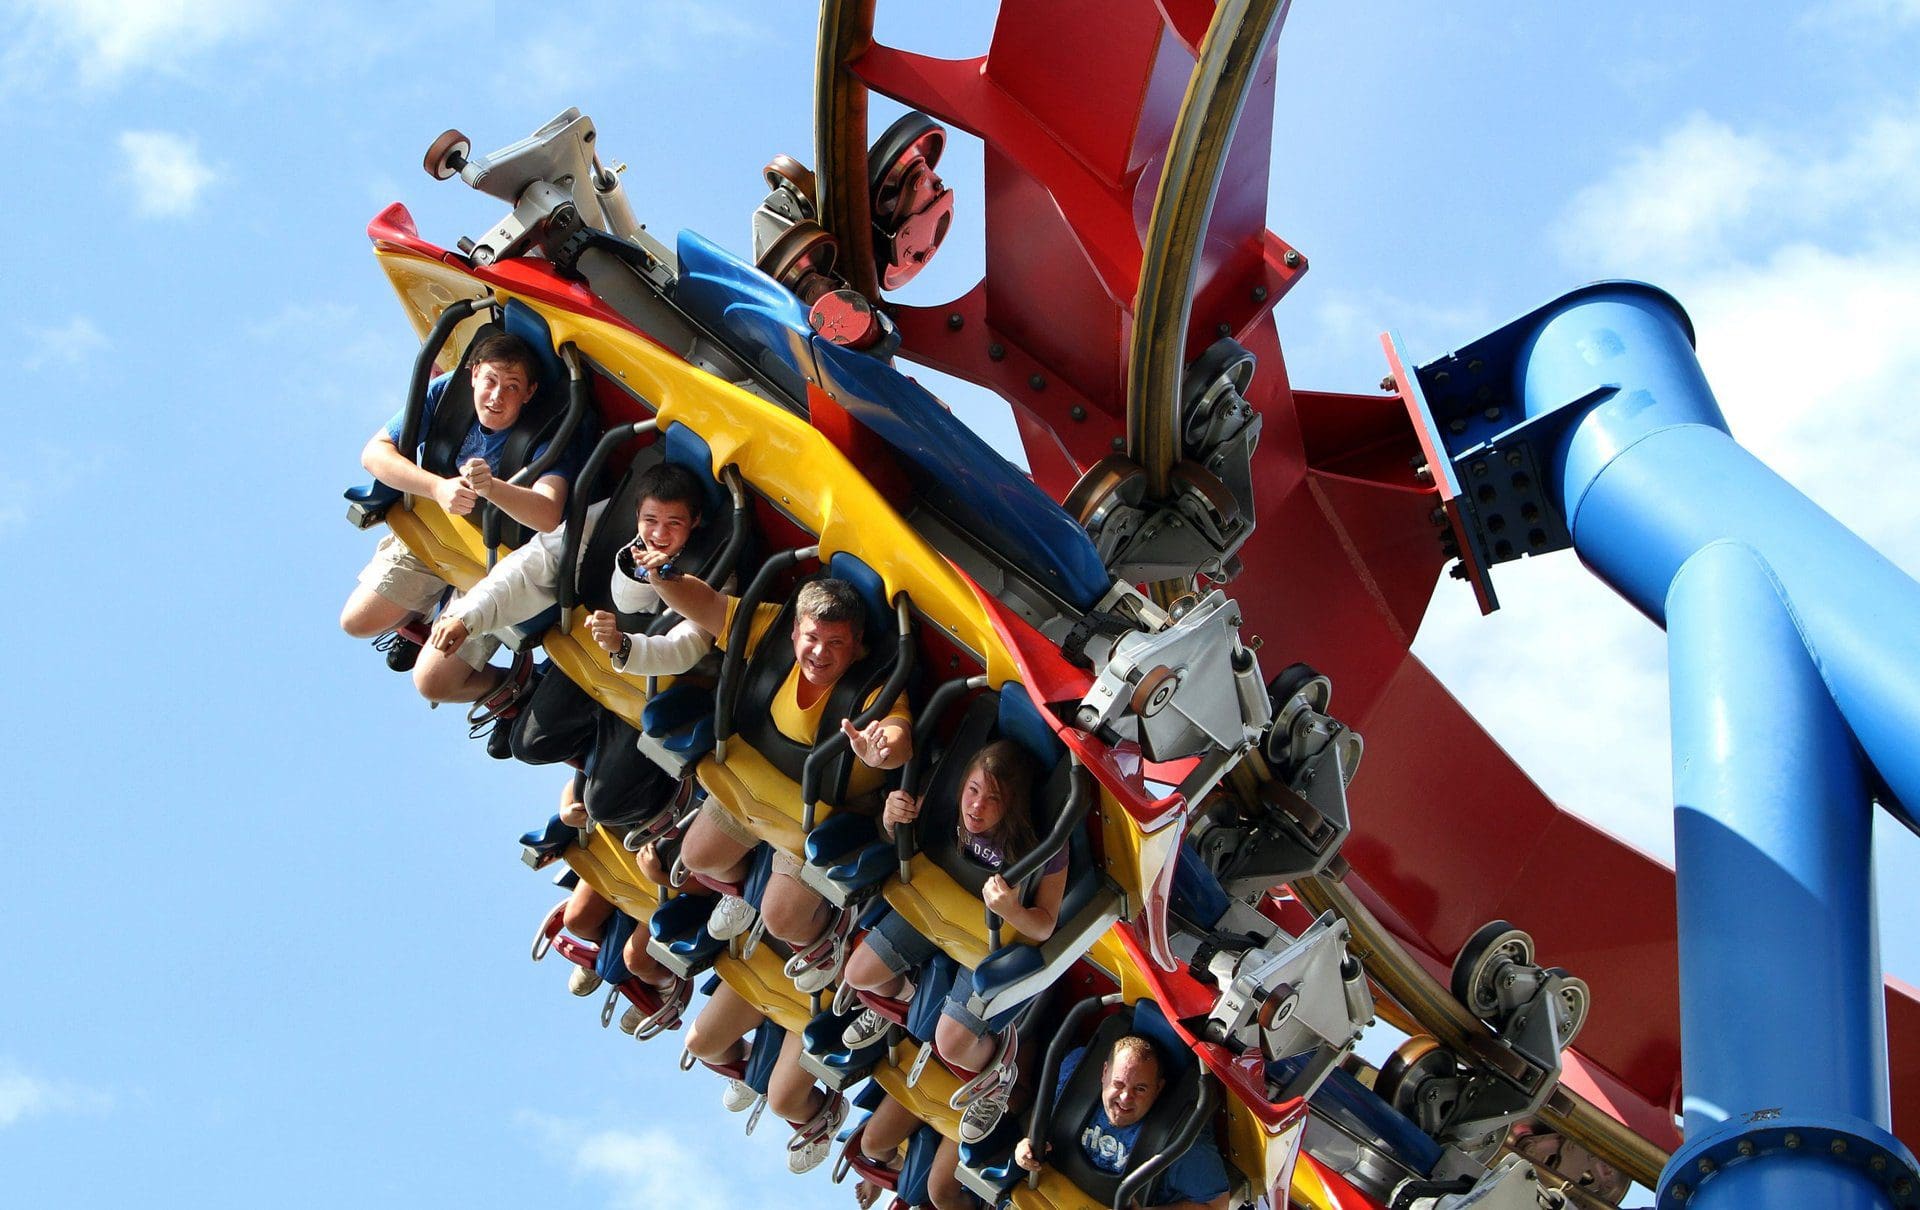 Guests on the superman ride at Six Flags Great America.